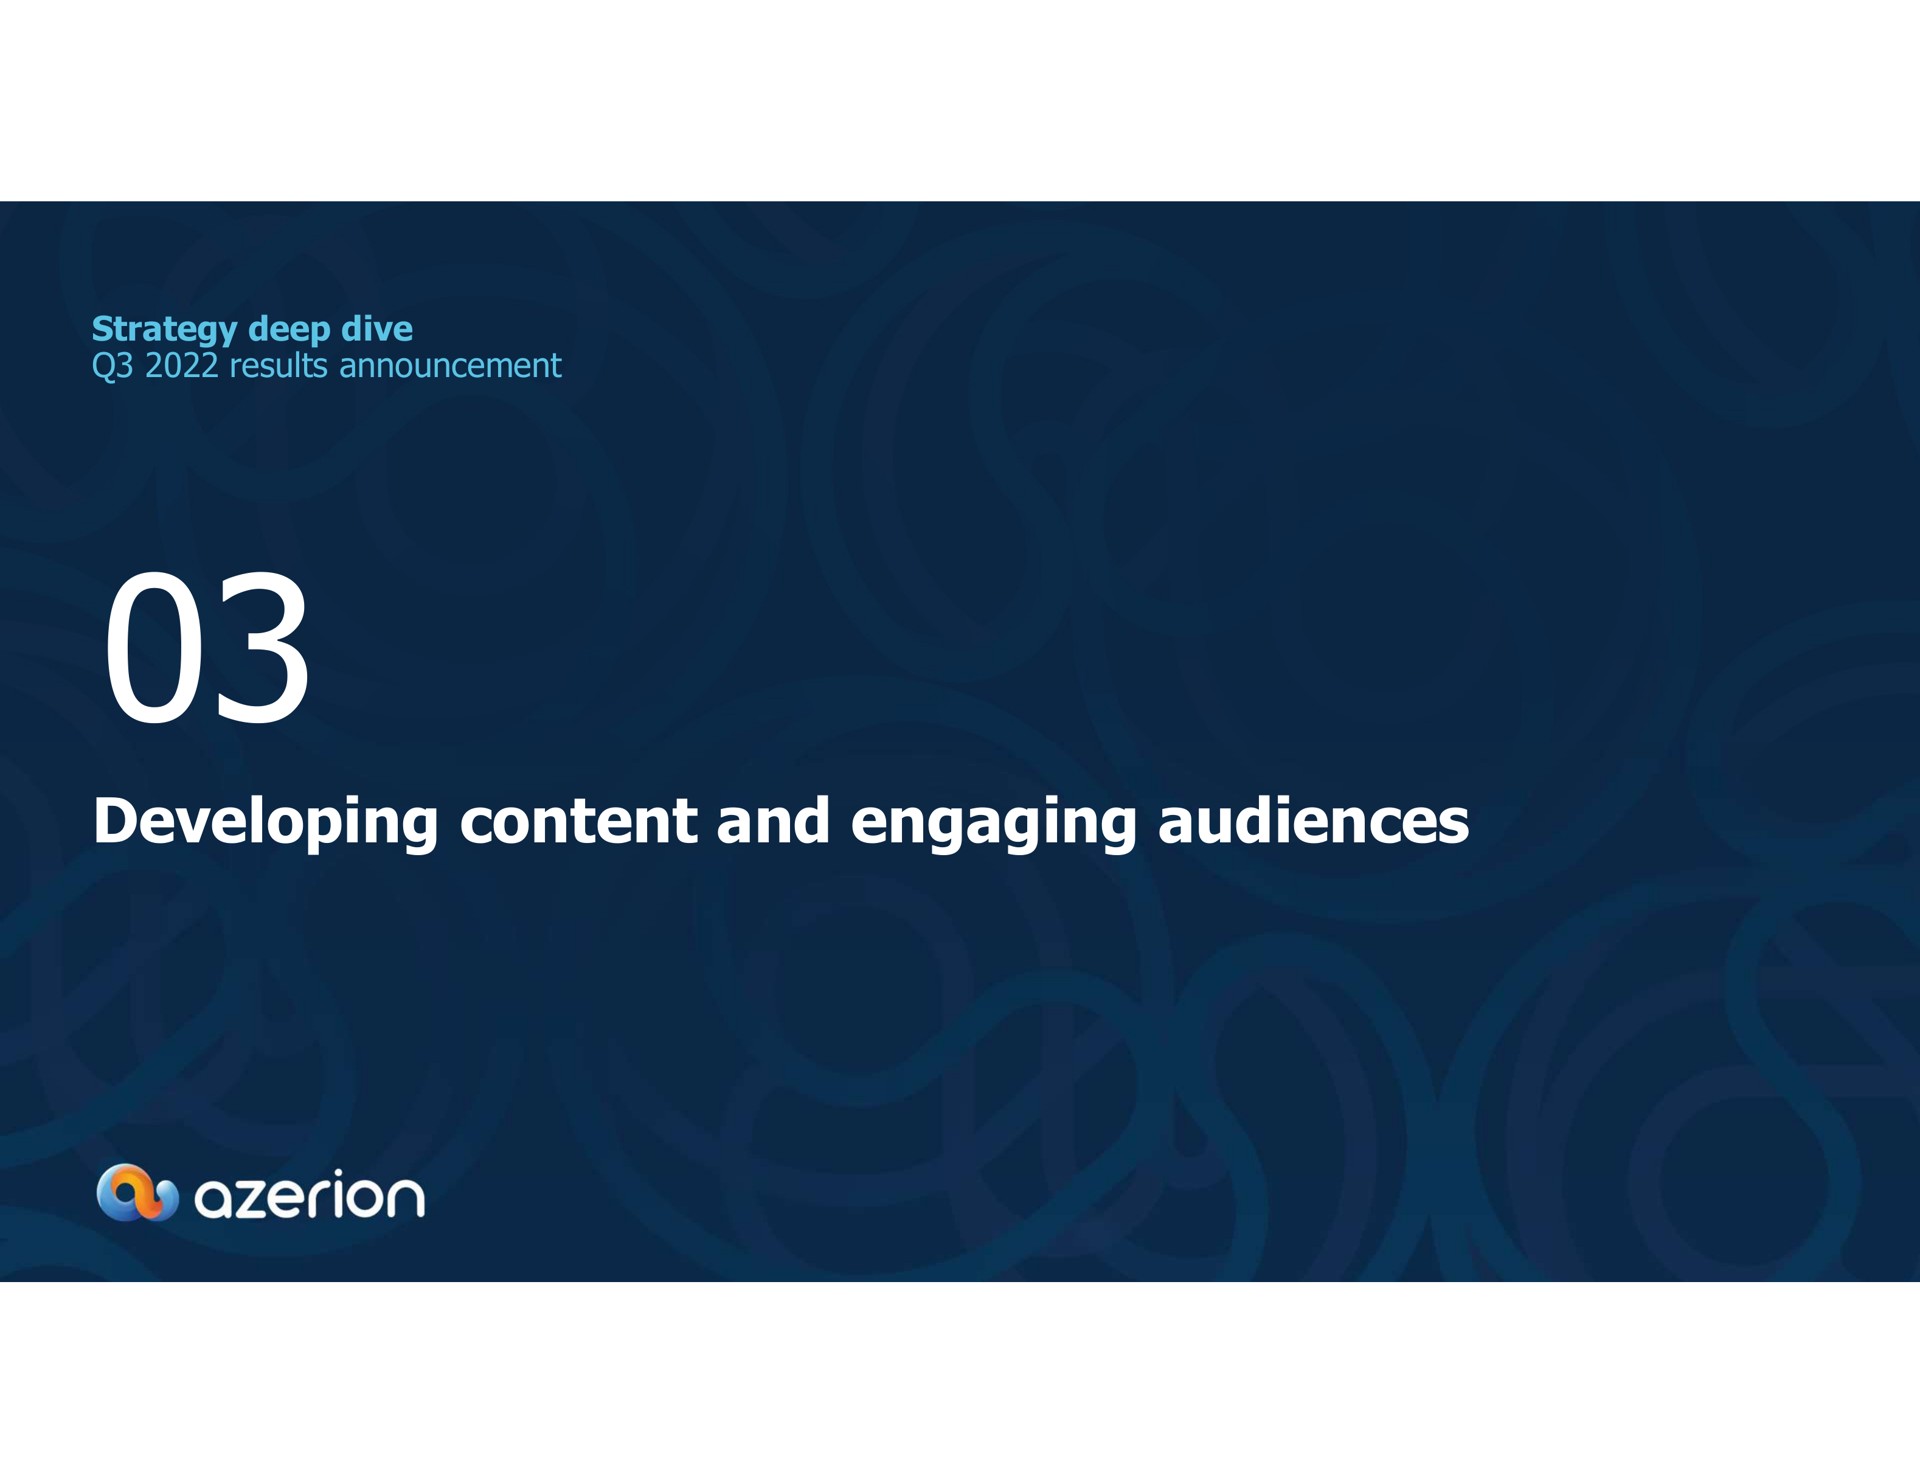 strategy deep dive results announcement developing content and engaging audiences as | Azerion